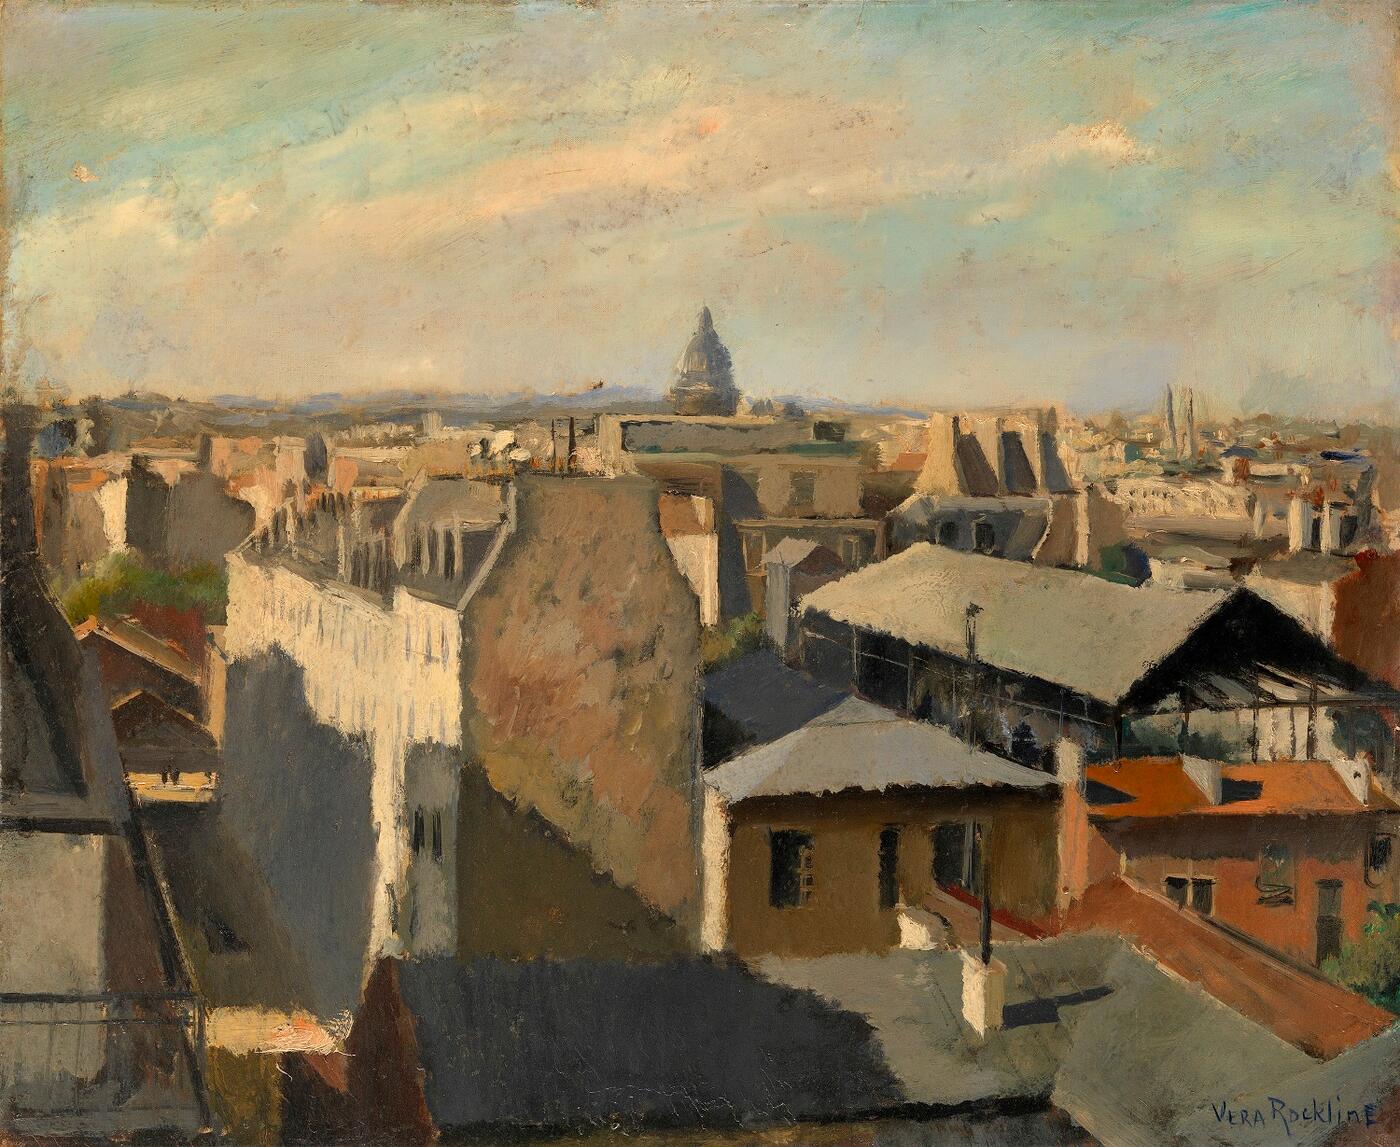 View from the Artist's Studio